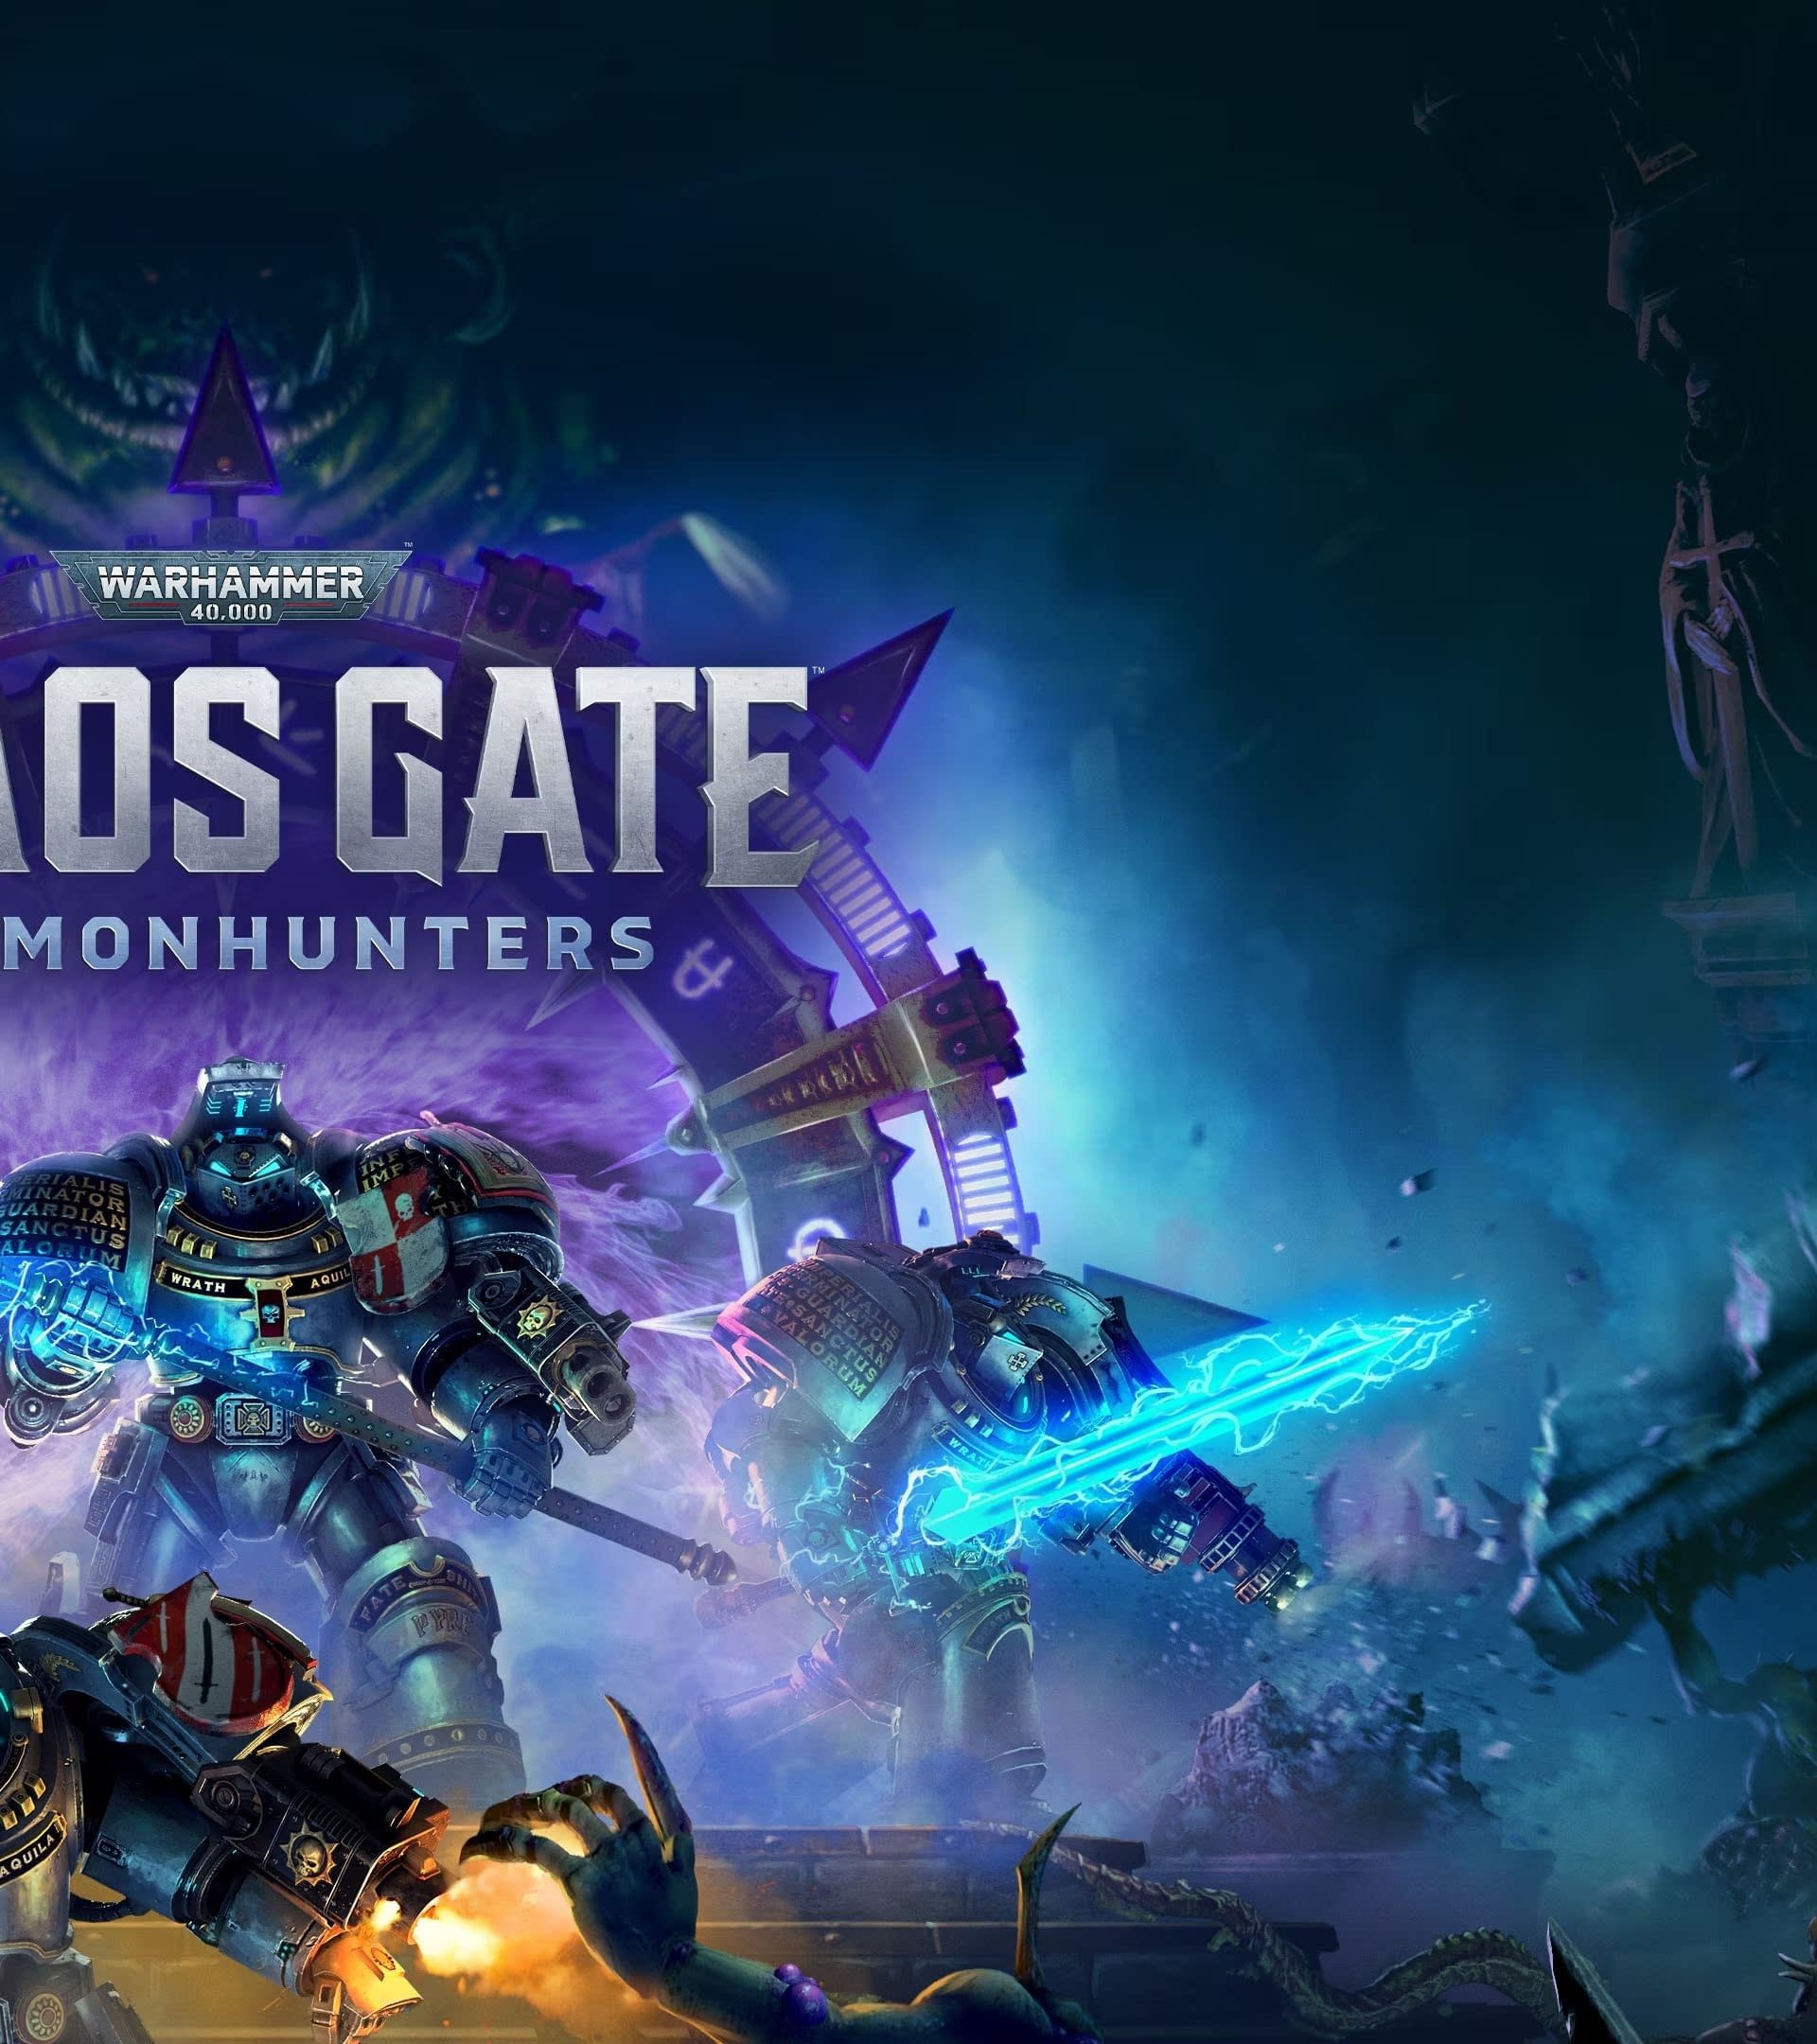 Warhammer 40,000: Chaos Gate – Daemonhunters Comes to Consoles